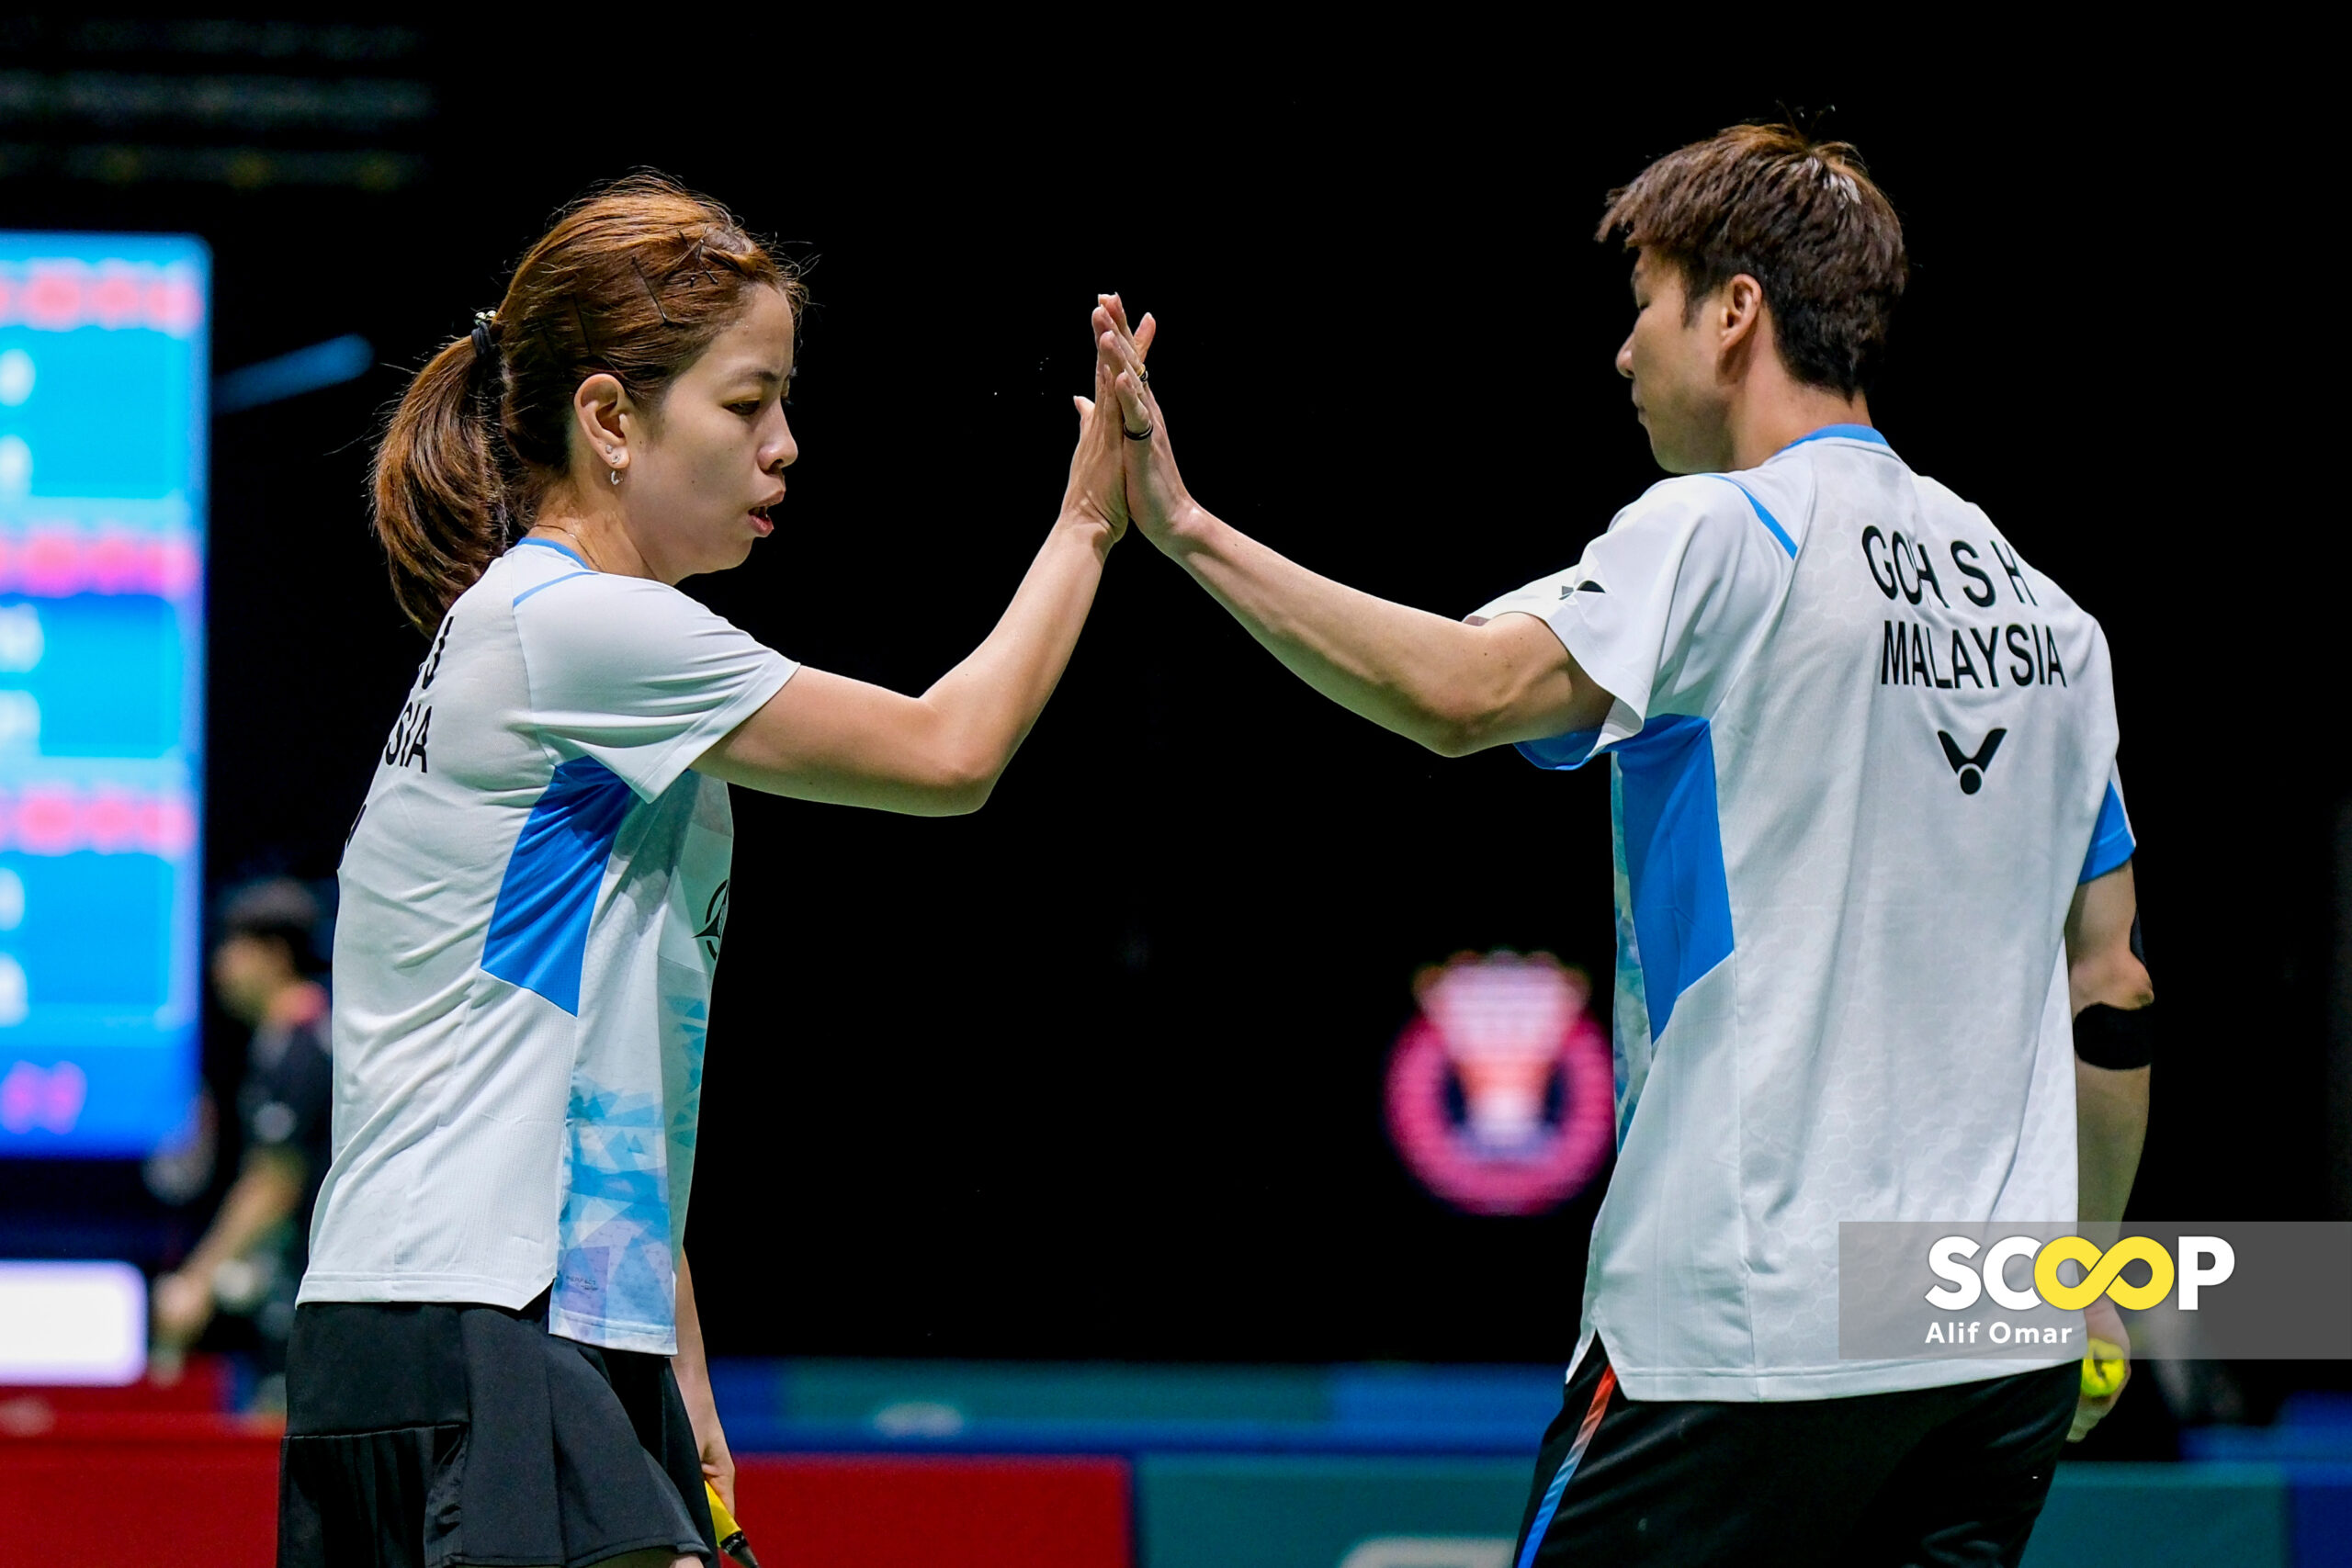 All-Malaysian mixed doubles final at Swiss Open